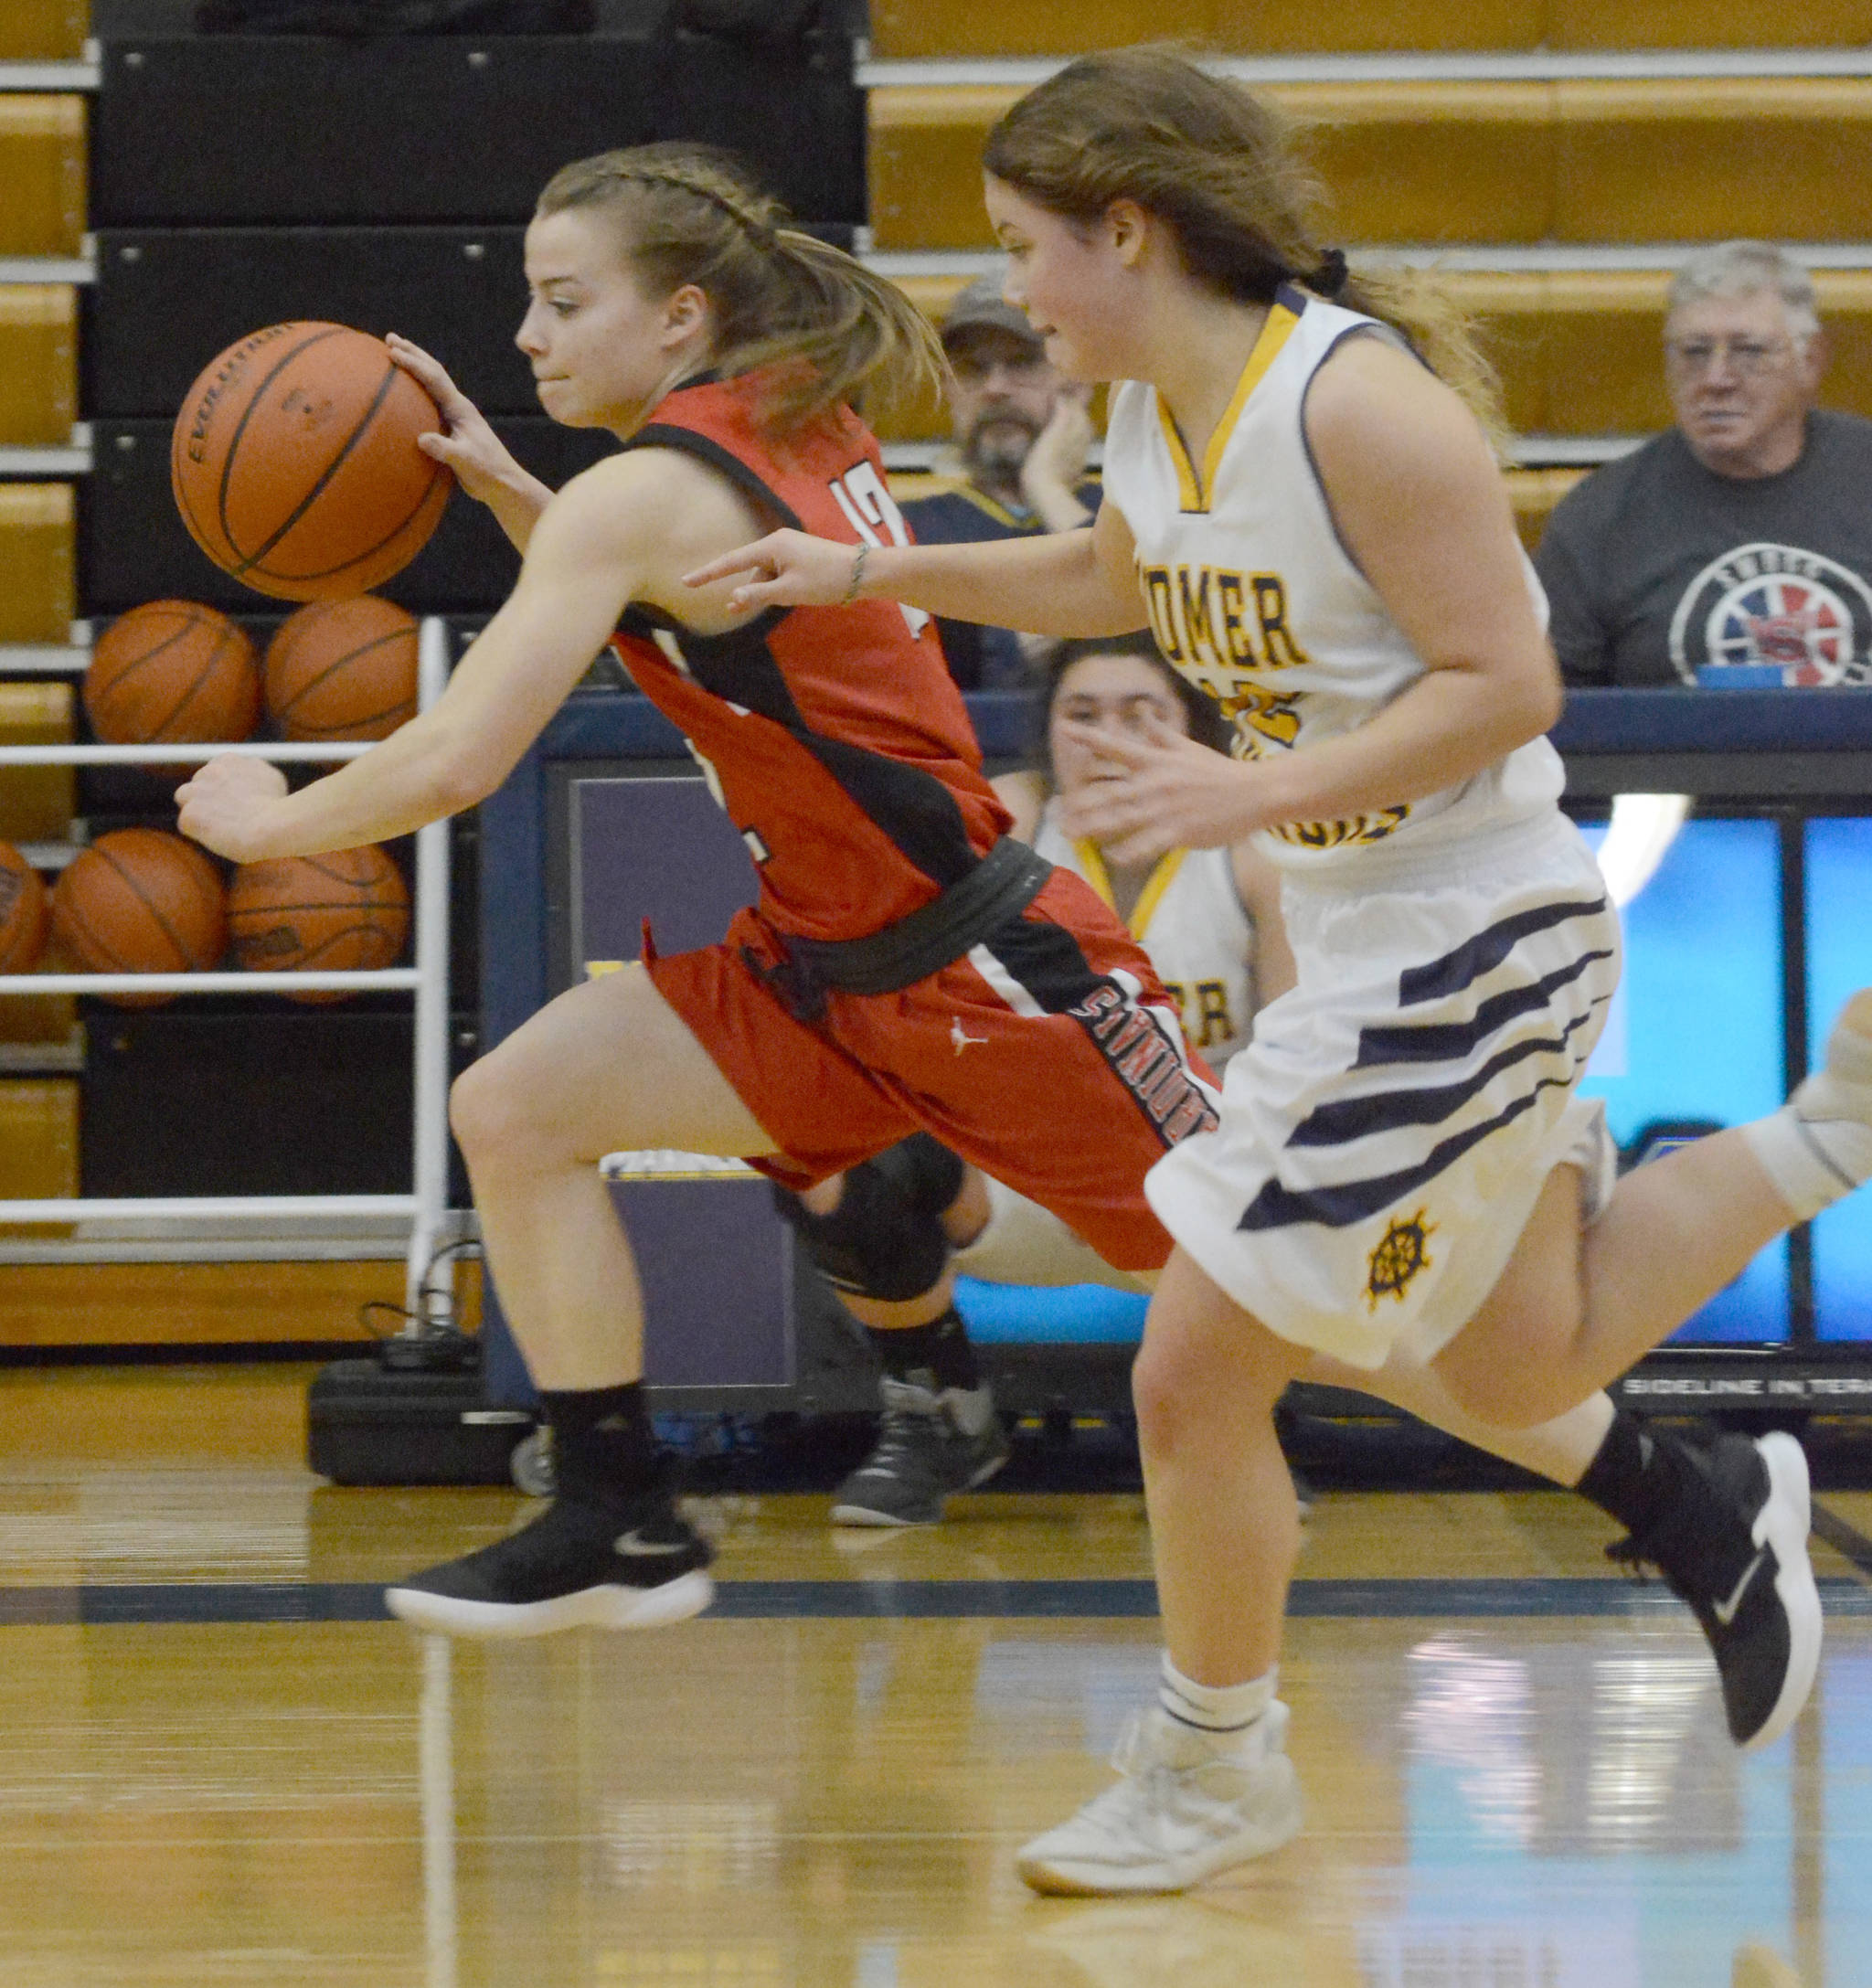 Kenai Central’s Hayley Maw dribbles against Homer on Friday, Dec. 21, 2018, in Homer, Alaska. (Photo by Michael Armstrong/Homer News)